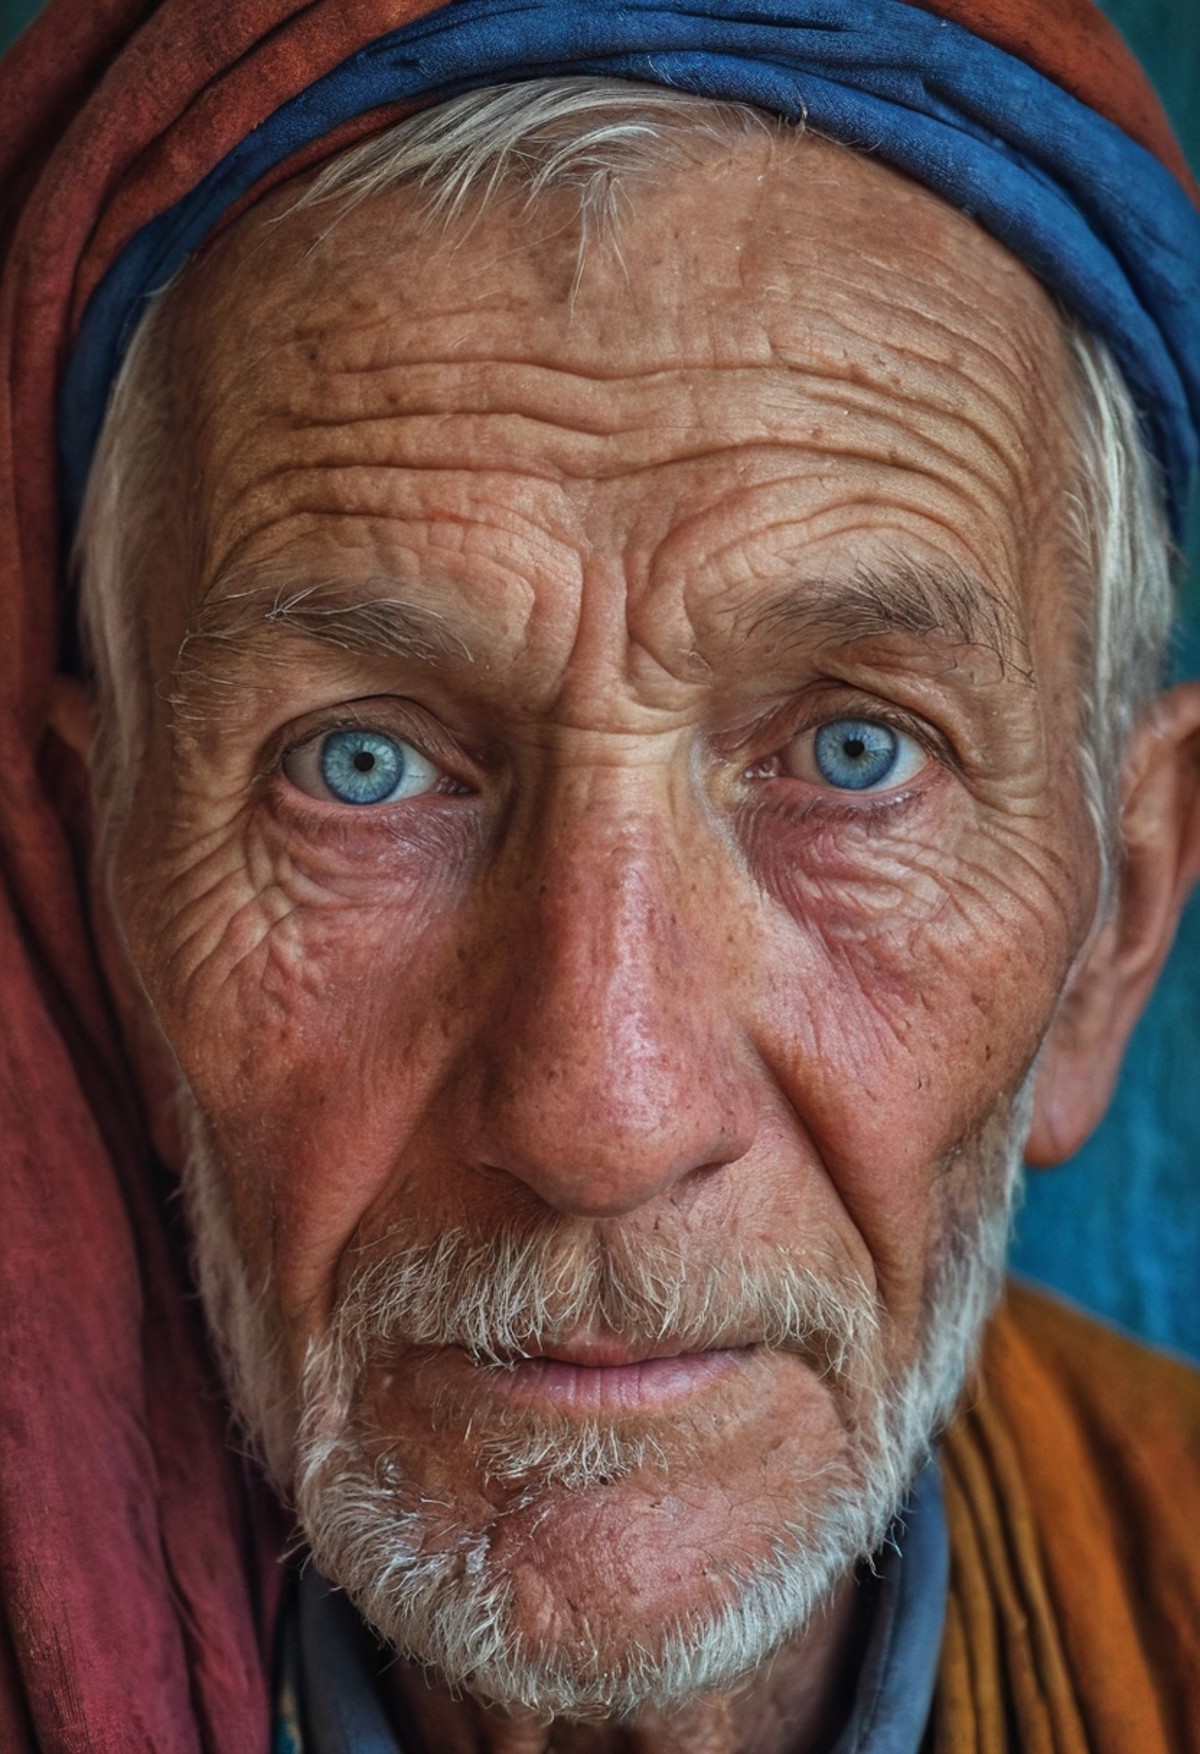 A colorful portrait of an elderly man with a weathered face, inspired by Steve McCurryâs photography. Warm tones, detail...